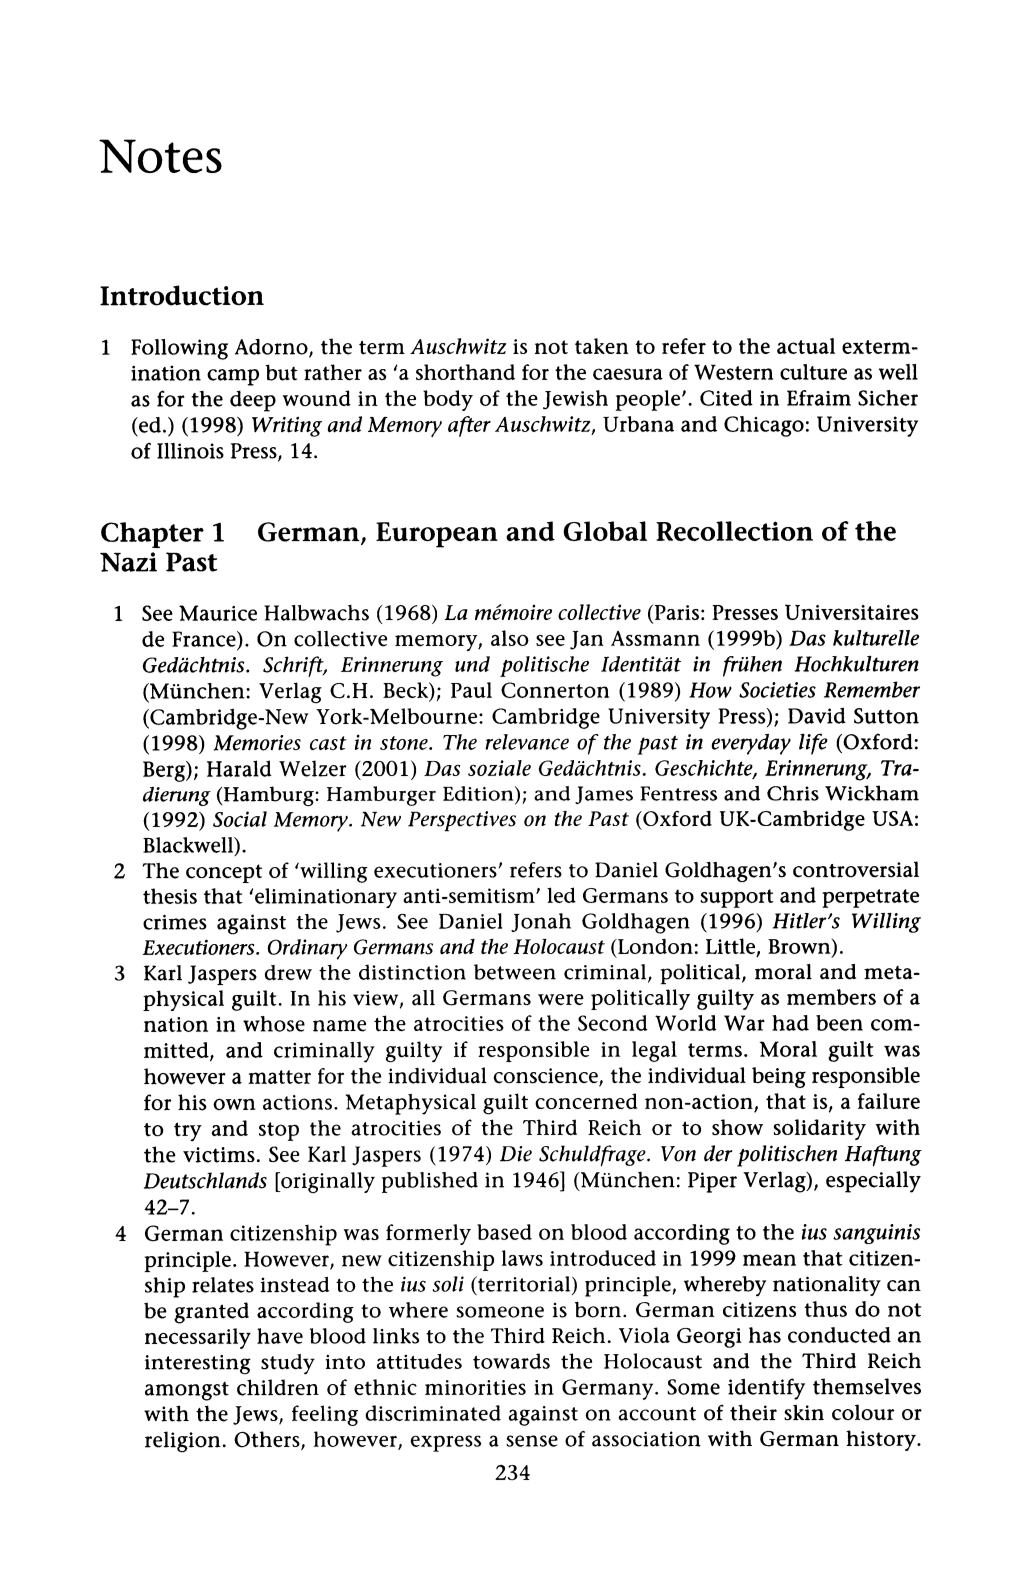 Introduction Chapter 1 German, European and Global Recollection